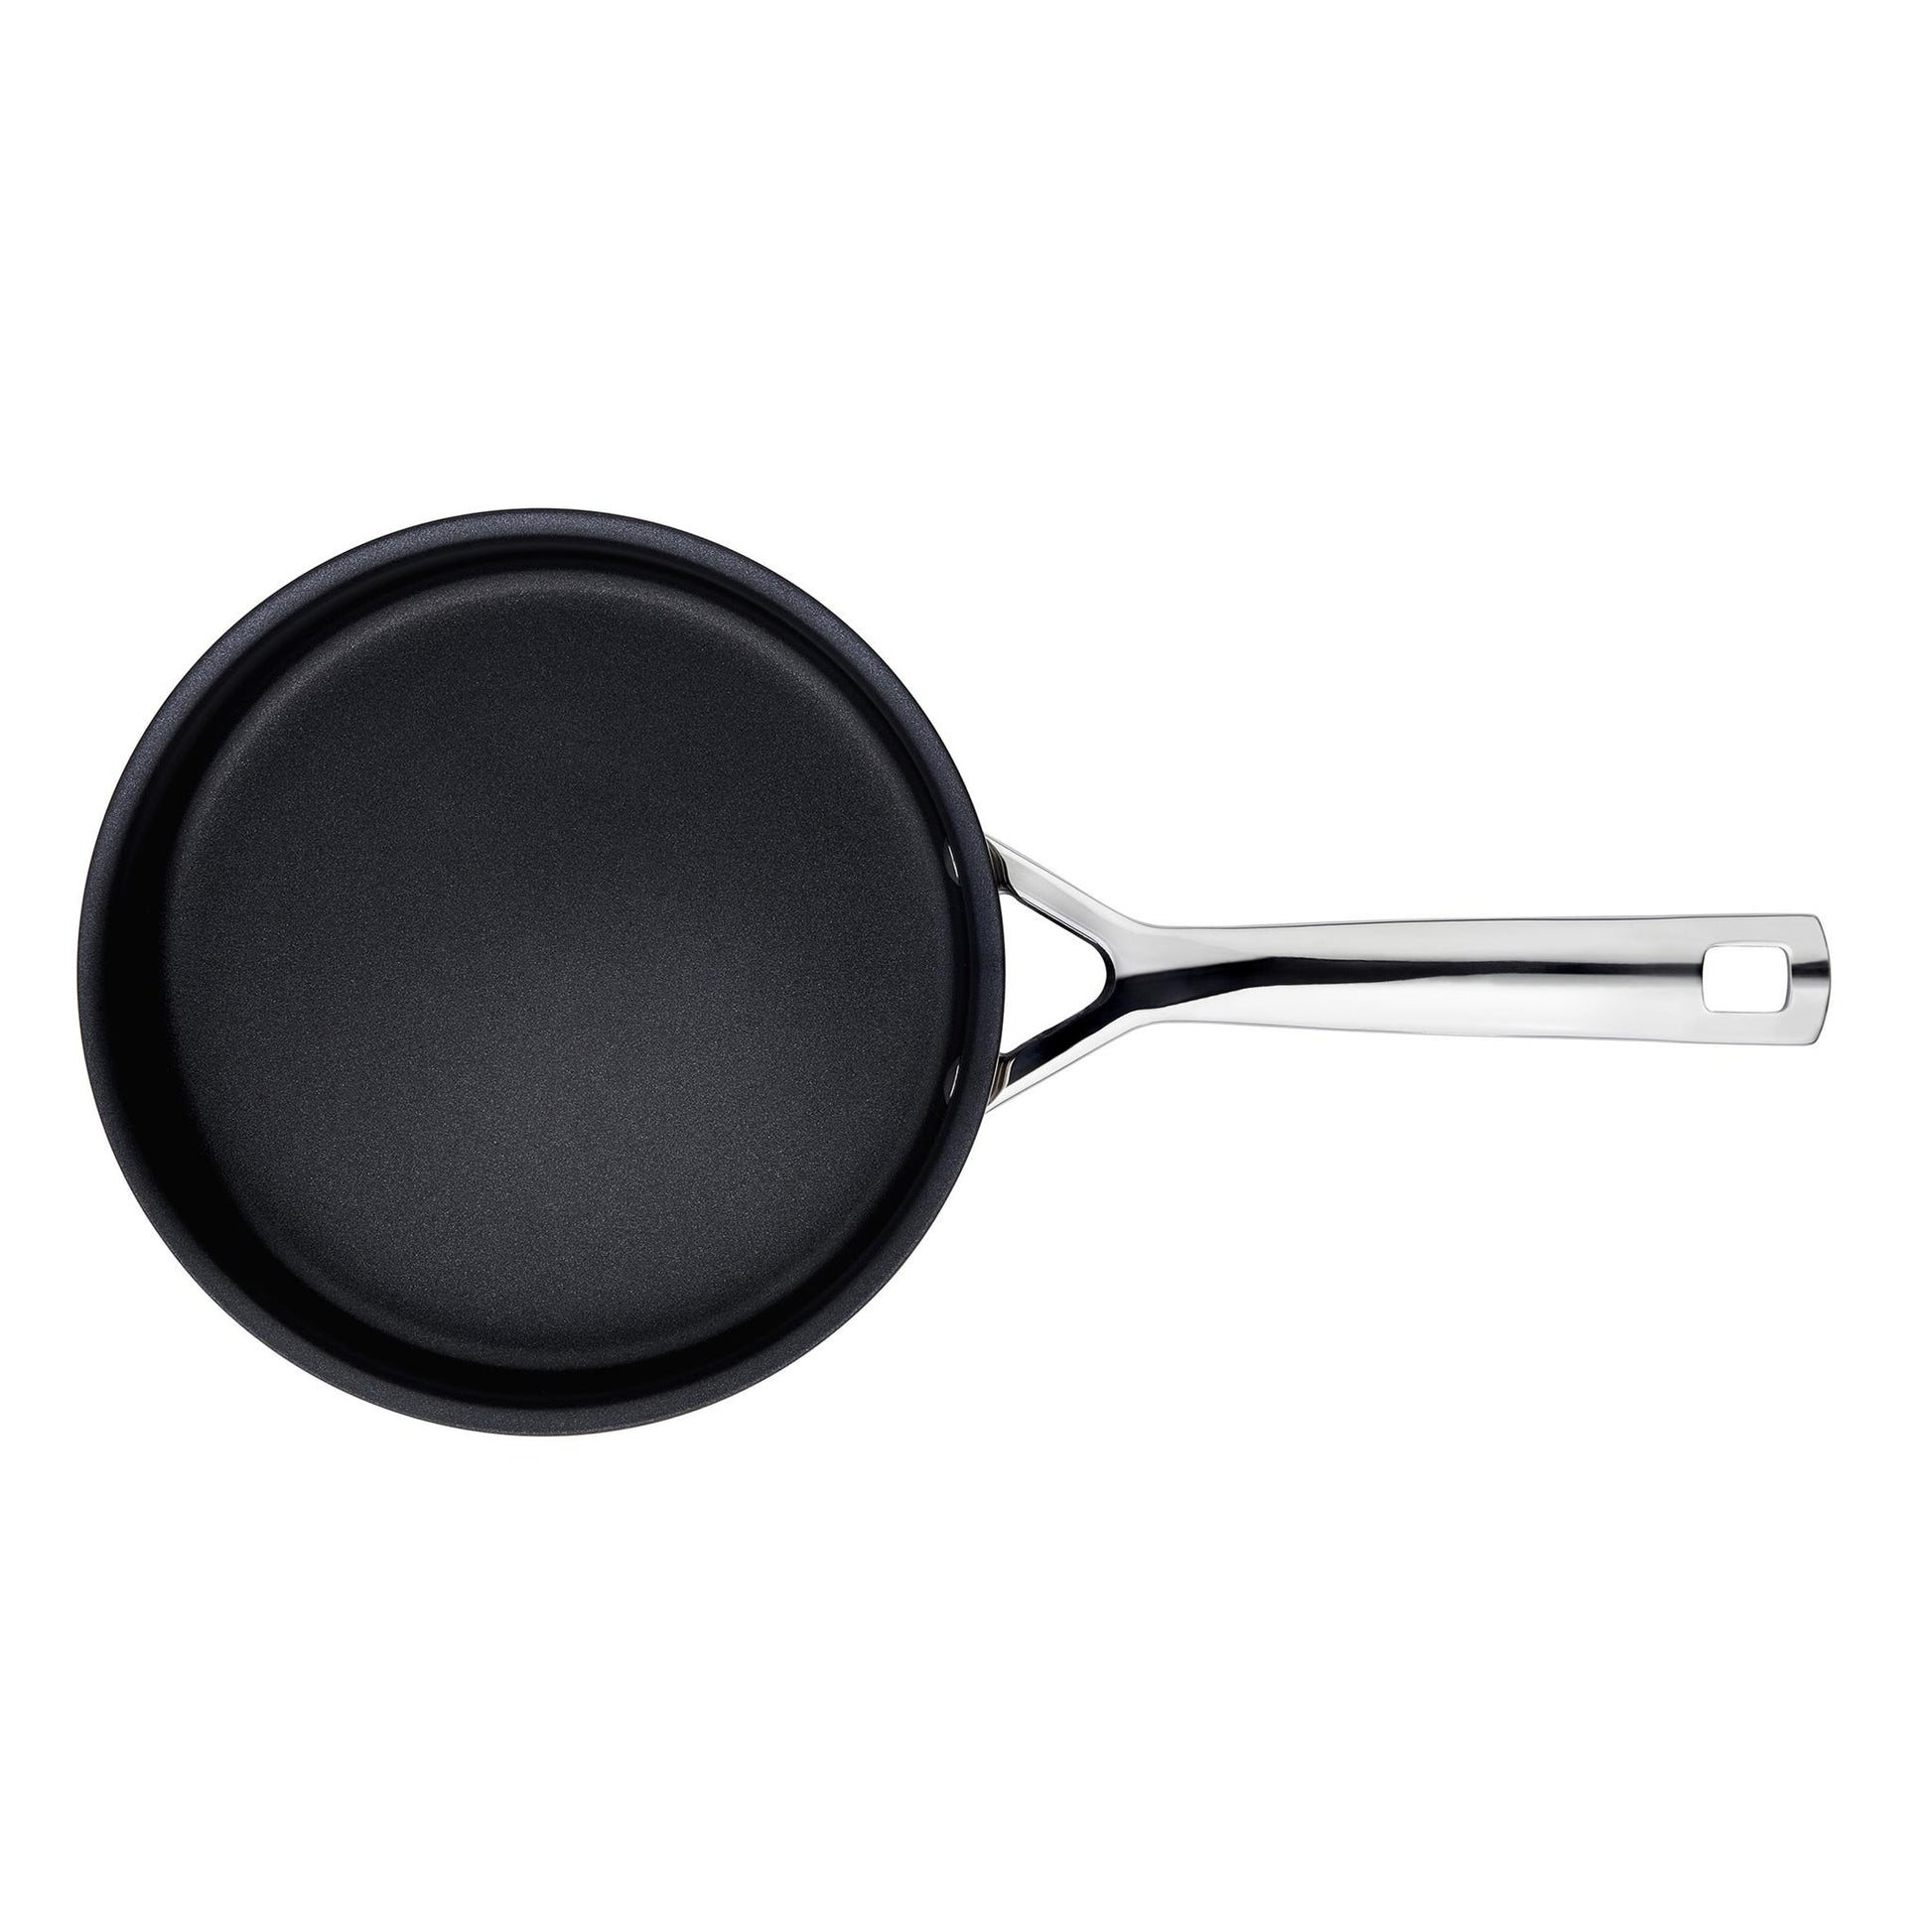 The Le Creuset saute pan with stainless steel exterior and handle and black non stick lining shown from above